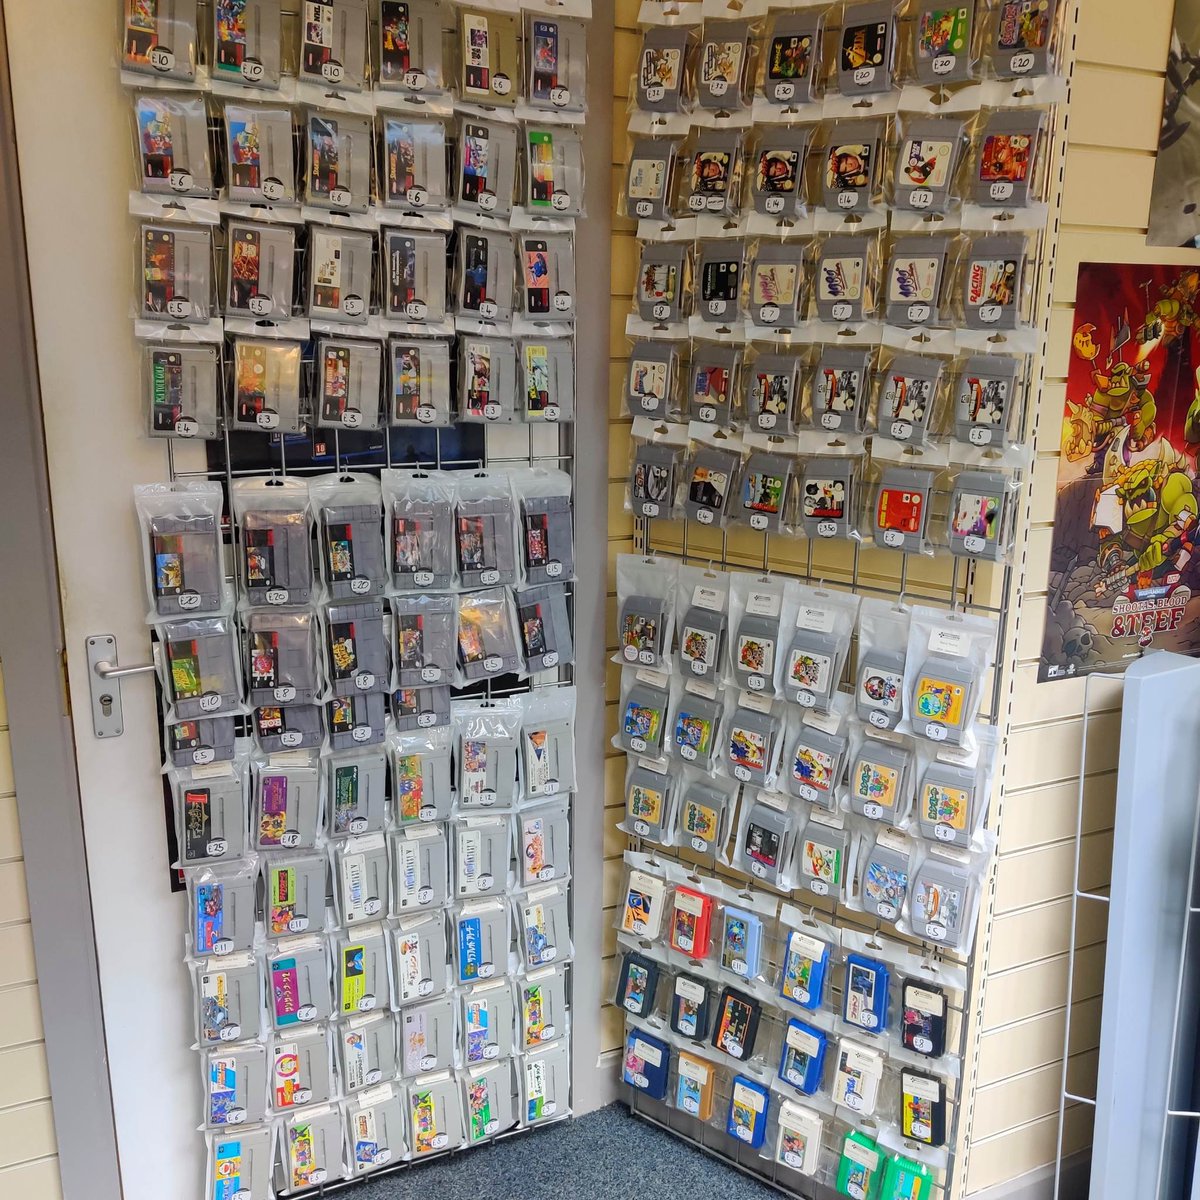 After much work, the Nintendo Cartridge selection is looking fresh and correctly priced again!

Theirs  a nice mix of PAL and NTSC region games to choose from :D
Webstore: entertainmentstation.co.uk 

#nintendo #indieretail #gaming #collecting #rotherham